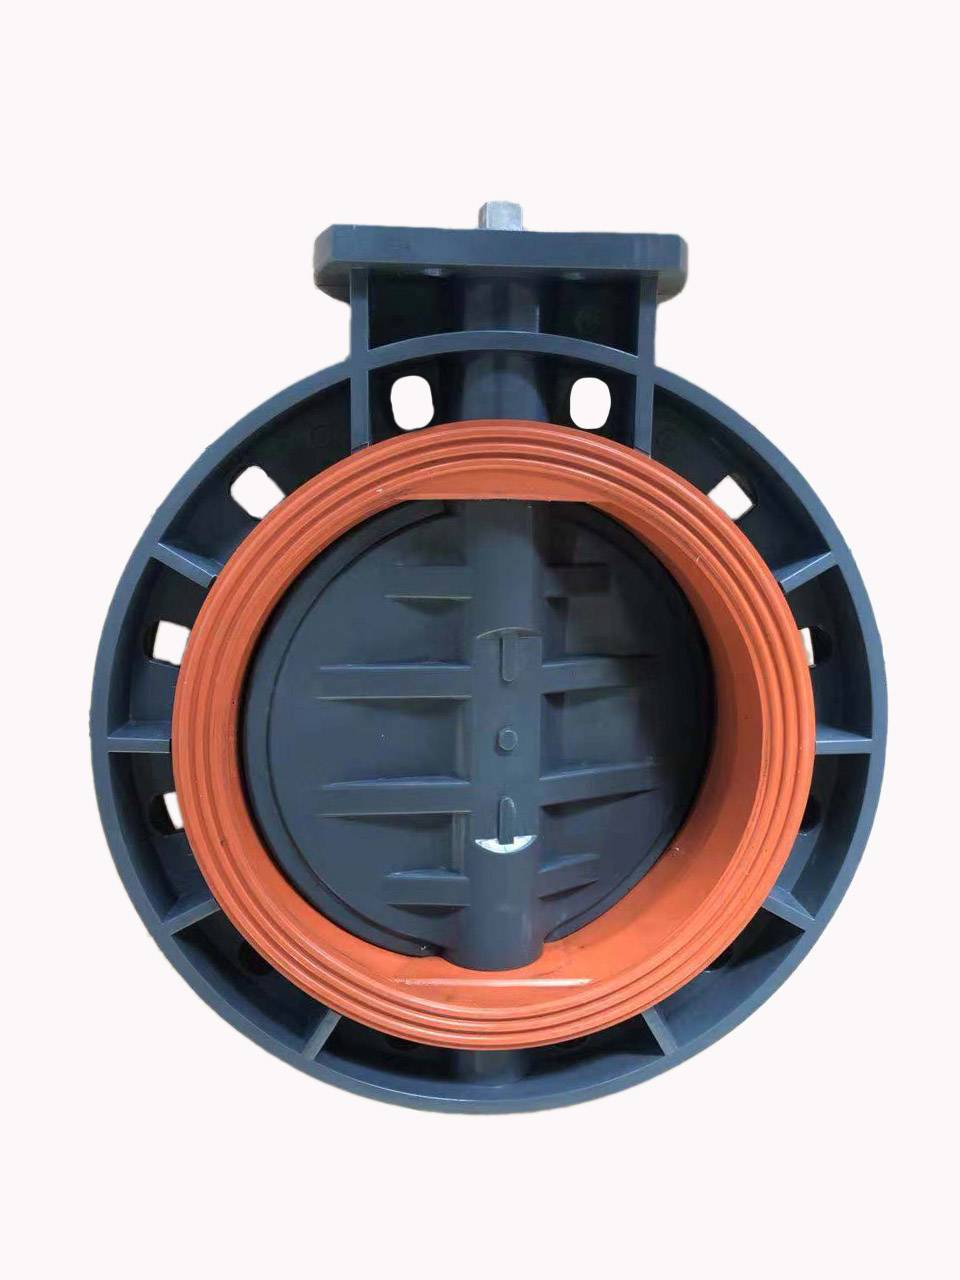 Special Design for b – Tractor Control Valve Hydraulic - UPVC butterfly valve Square head stem Mounting pad ISO5211 – DA YU PLASTIC